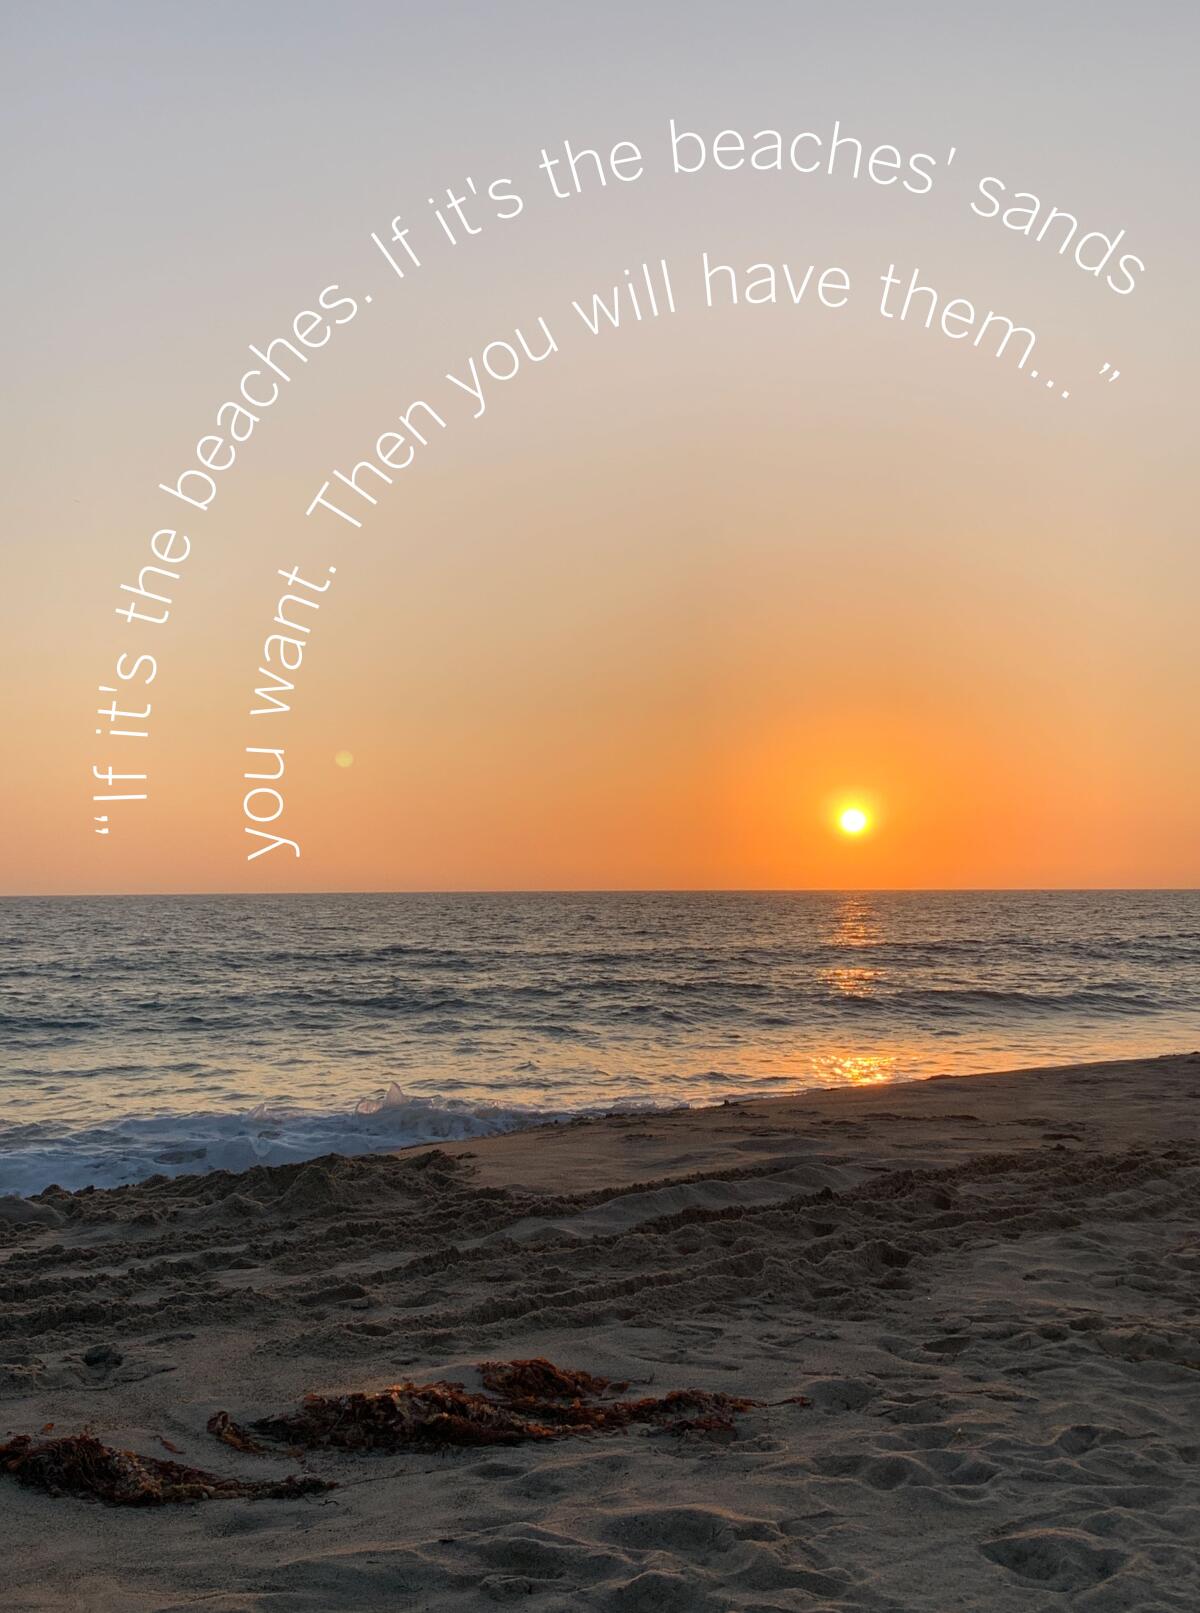 Photo of beach with lyrics from “If It’s the Beaches” by the Avett Brothers